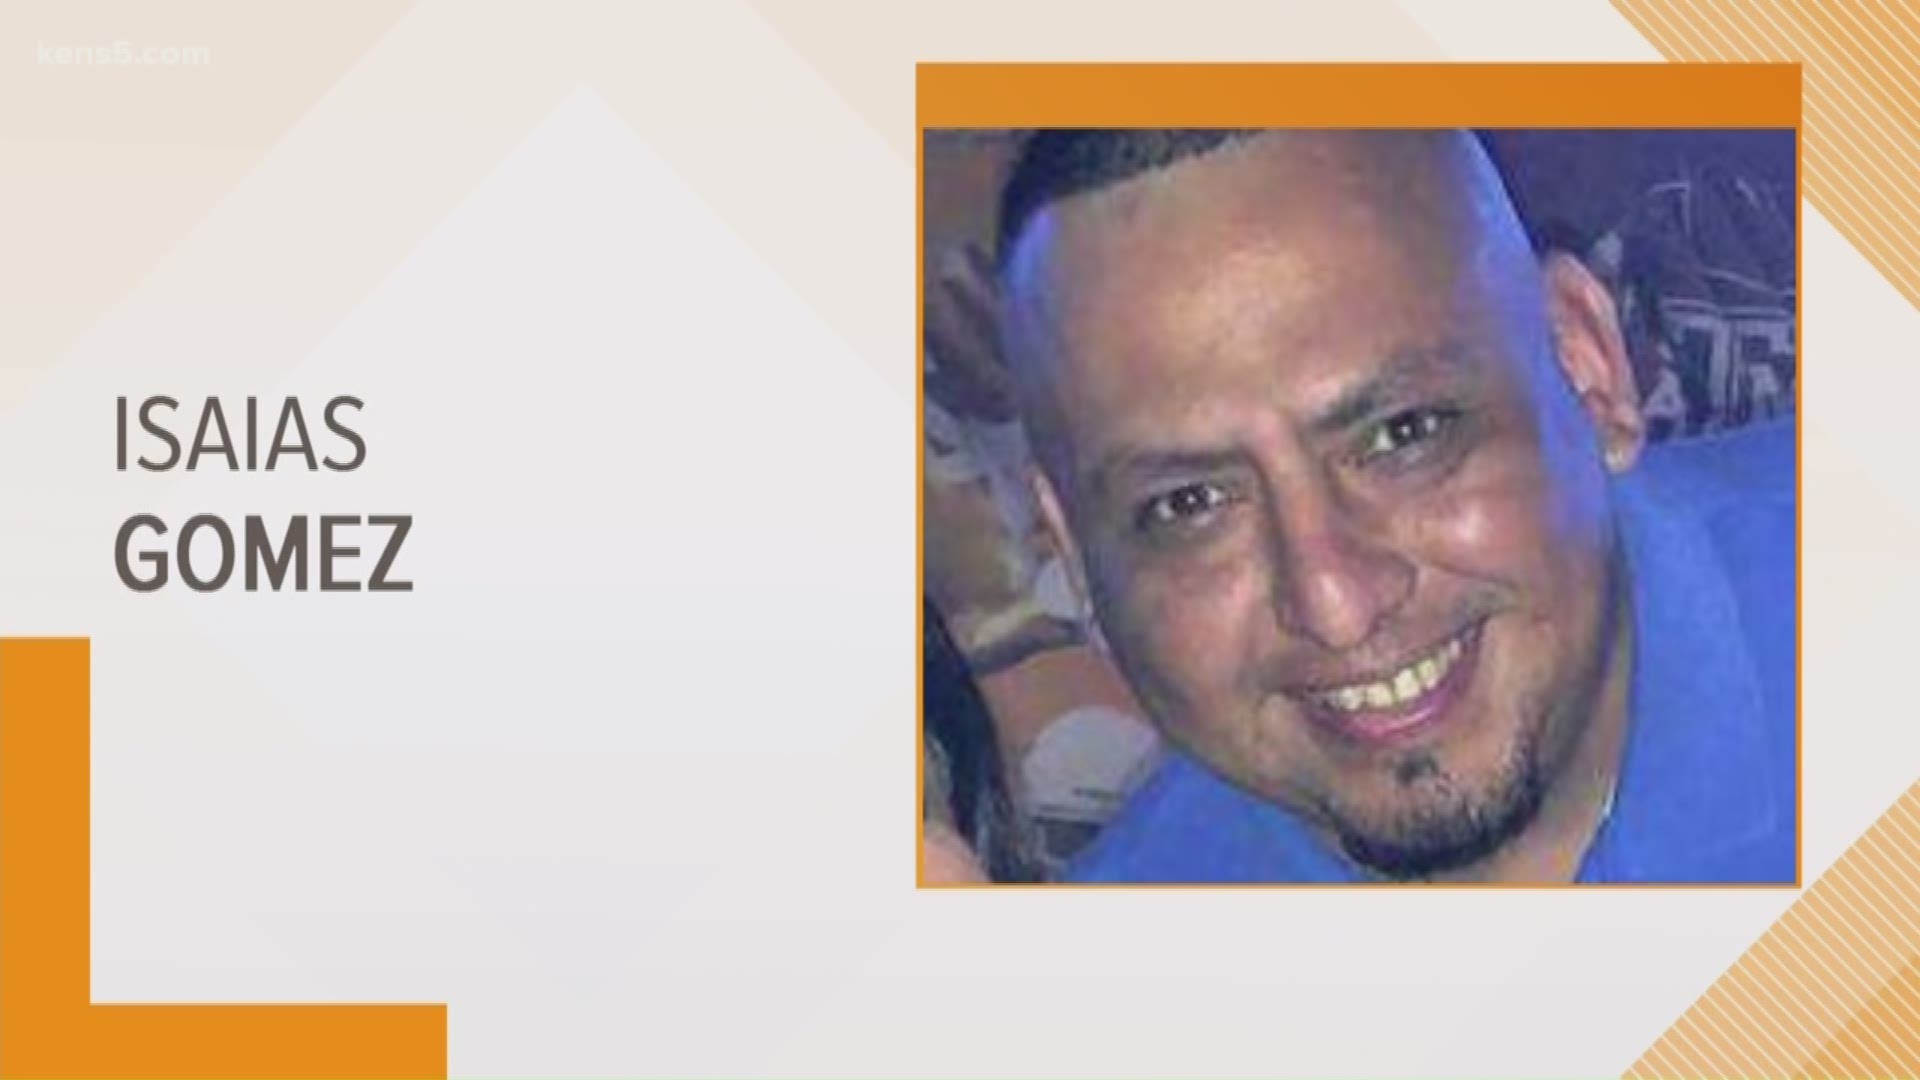 Police are looking for the driver of a pickup truck that crashed into Isaias Gomez's car before he died.